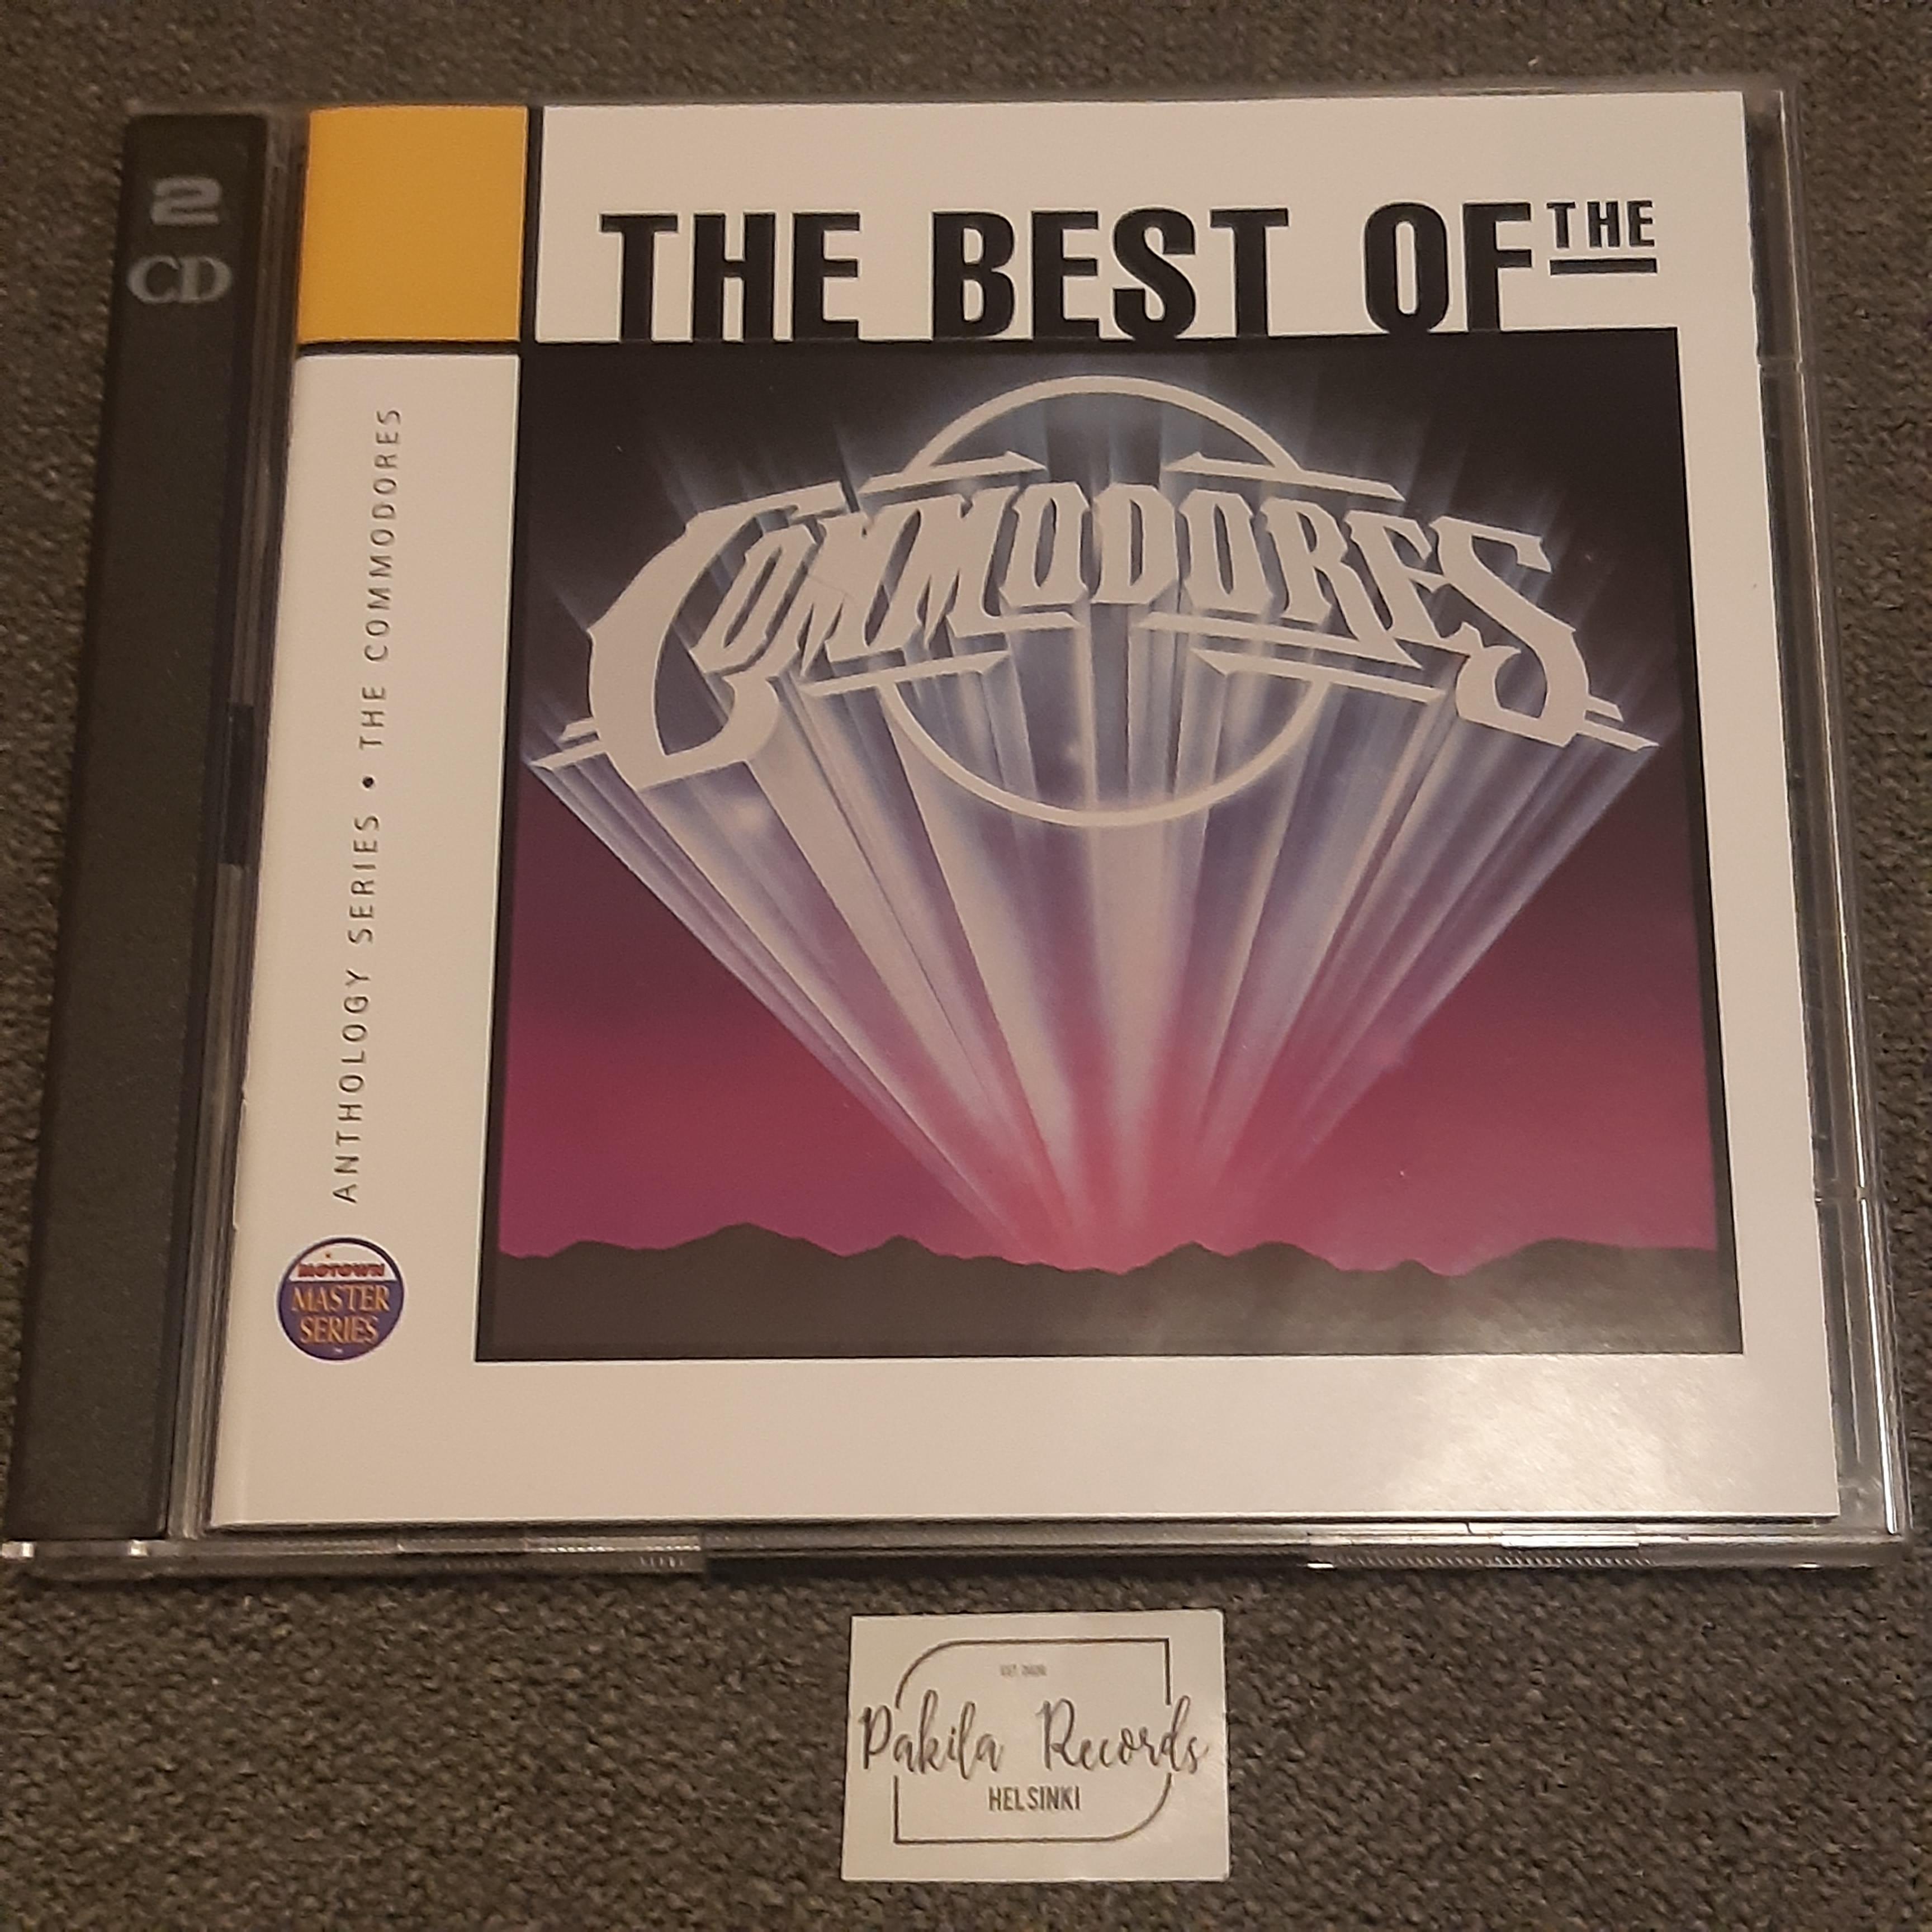 The Commodores - The Best Of - 2 CD (käytetty)